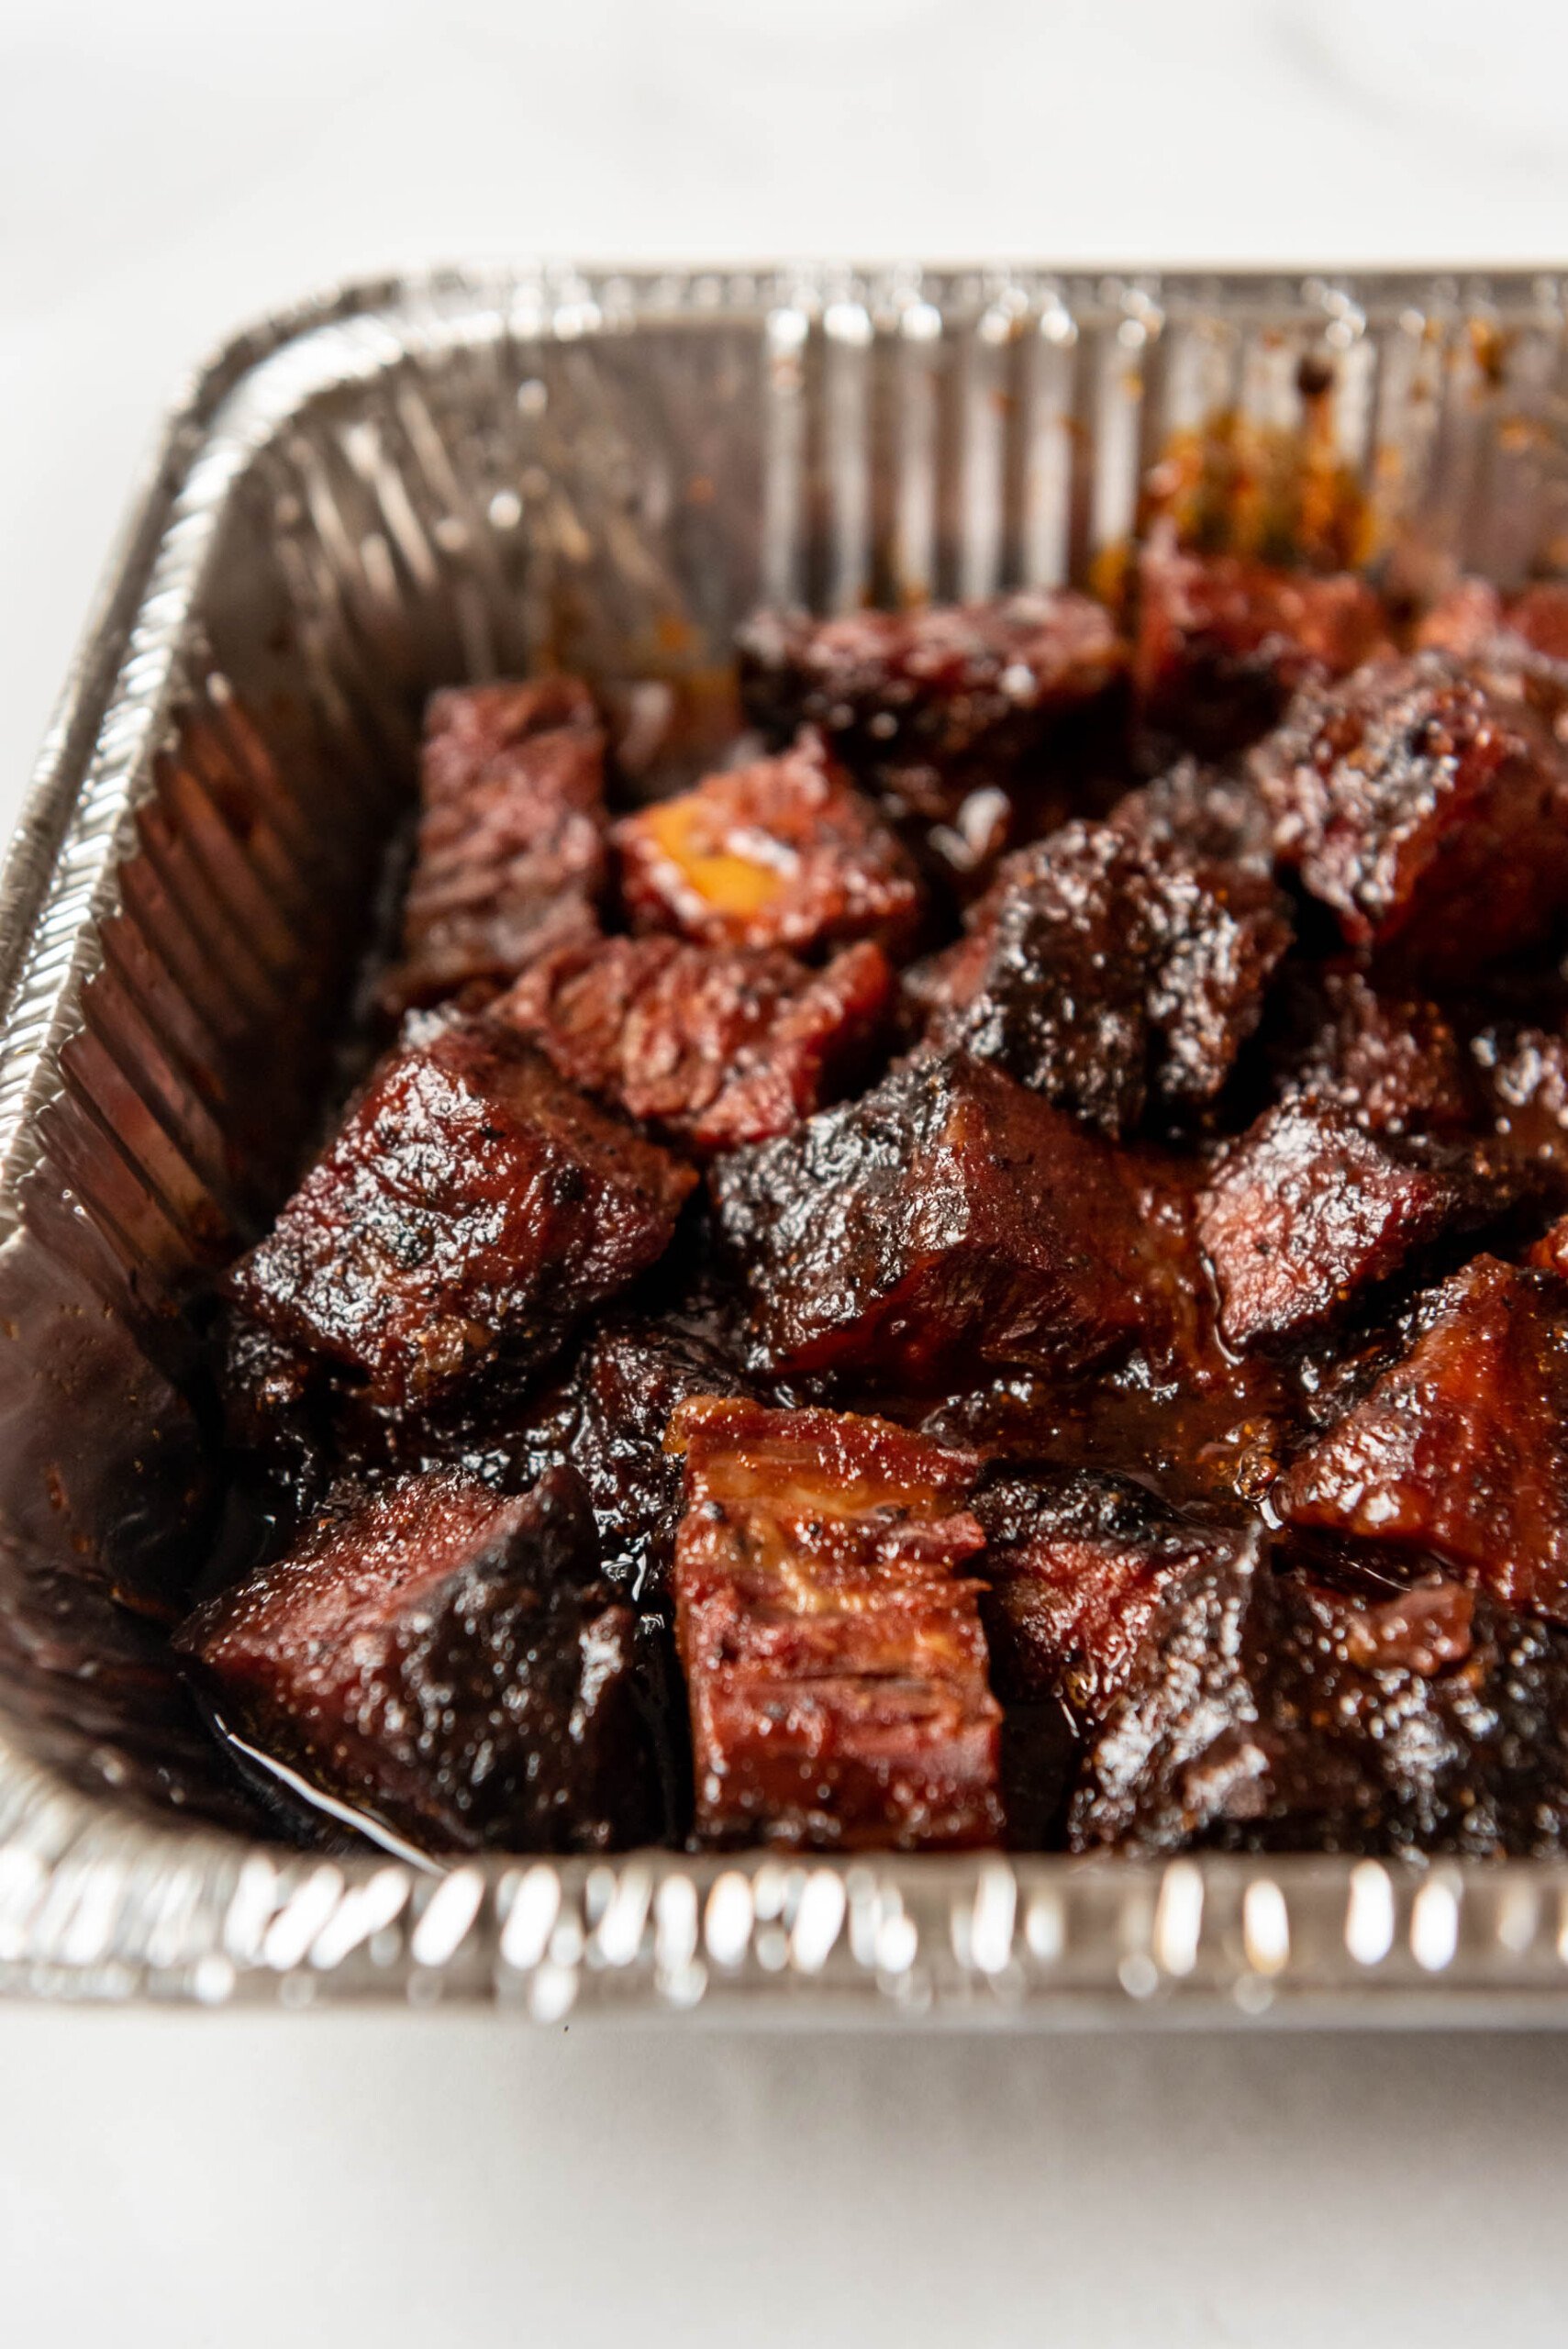 A close image of sticky BBQ brisket burnt ends in an aluminum pan.